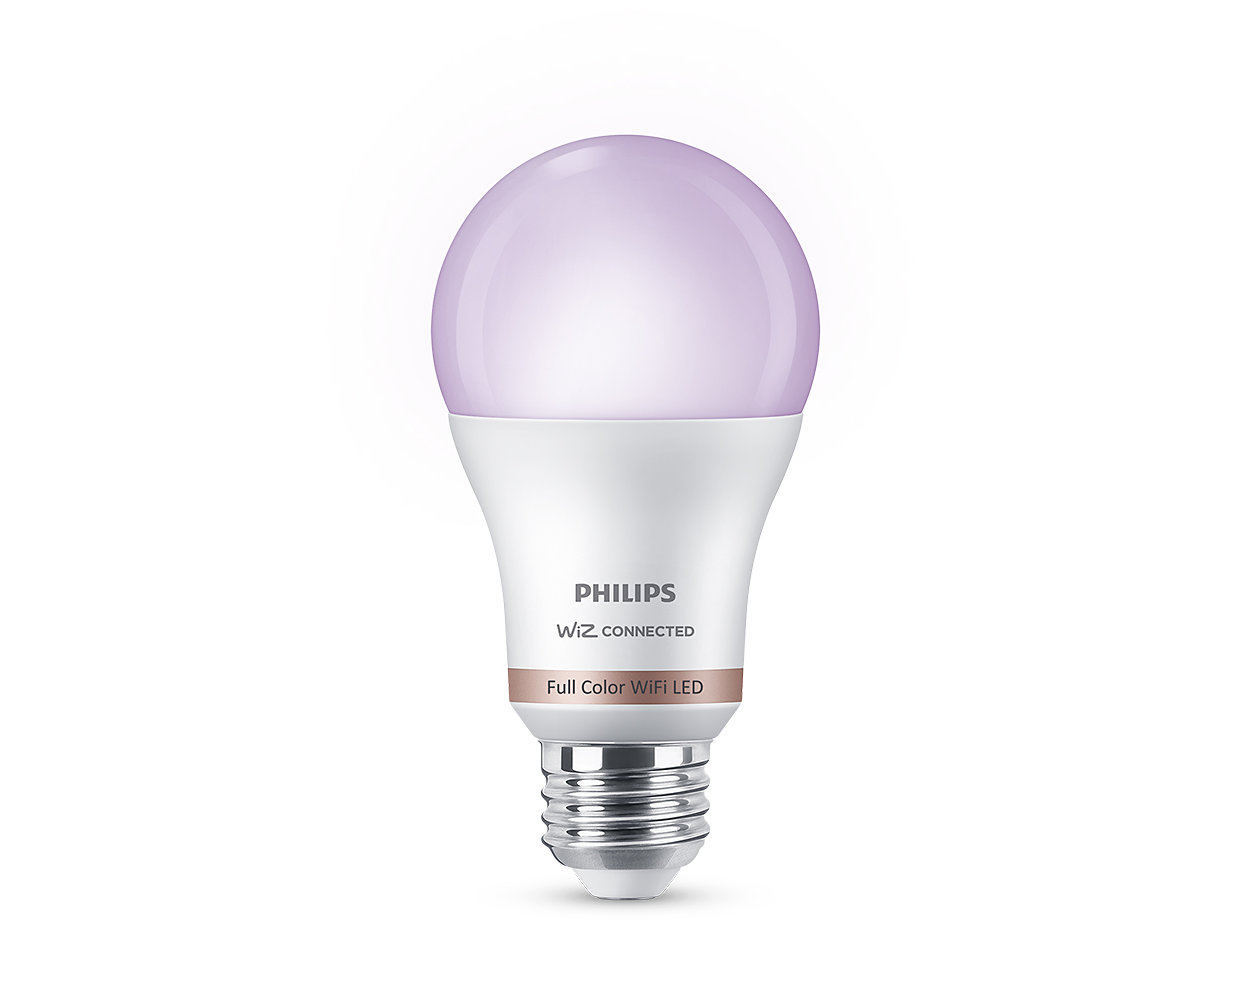 Easy-to-use smart full color bulb